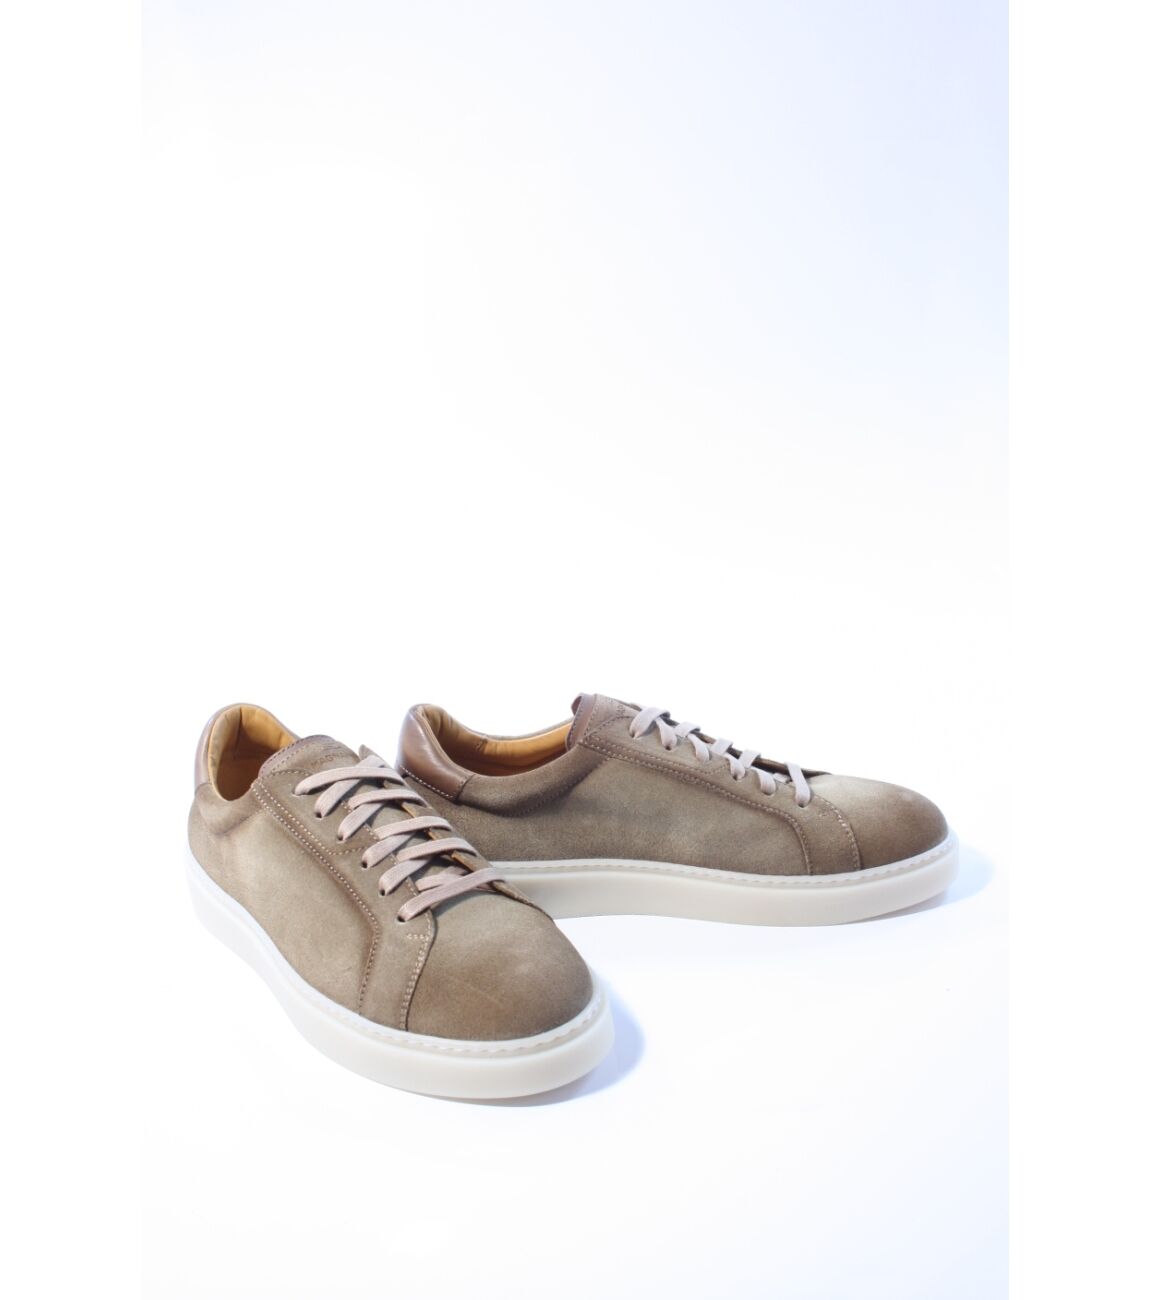 Magnanni Heren sneakers taupe 41.5